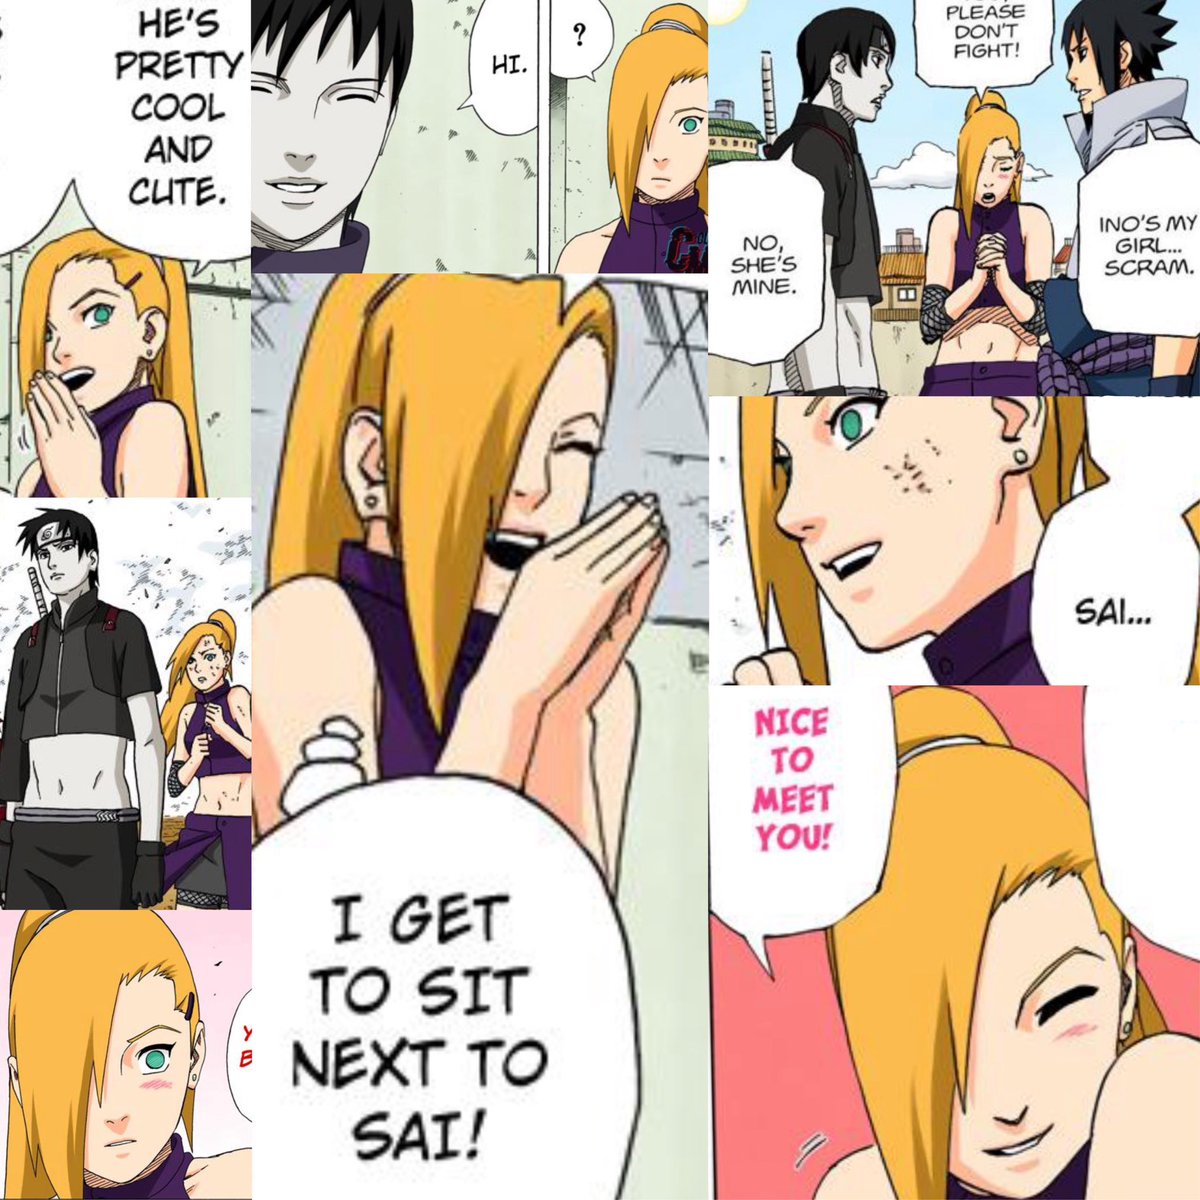 'Sai and Ino is such a random couple!' 'I totally didn't see it coming!' 'Sai and Ino had no canon content!'

Also Ino around Sai in the manga: